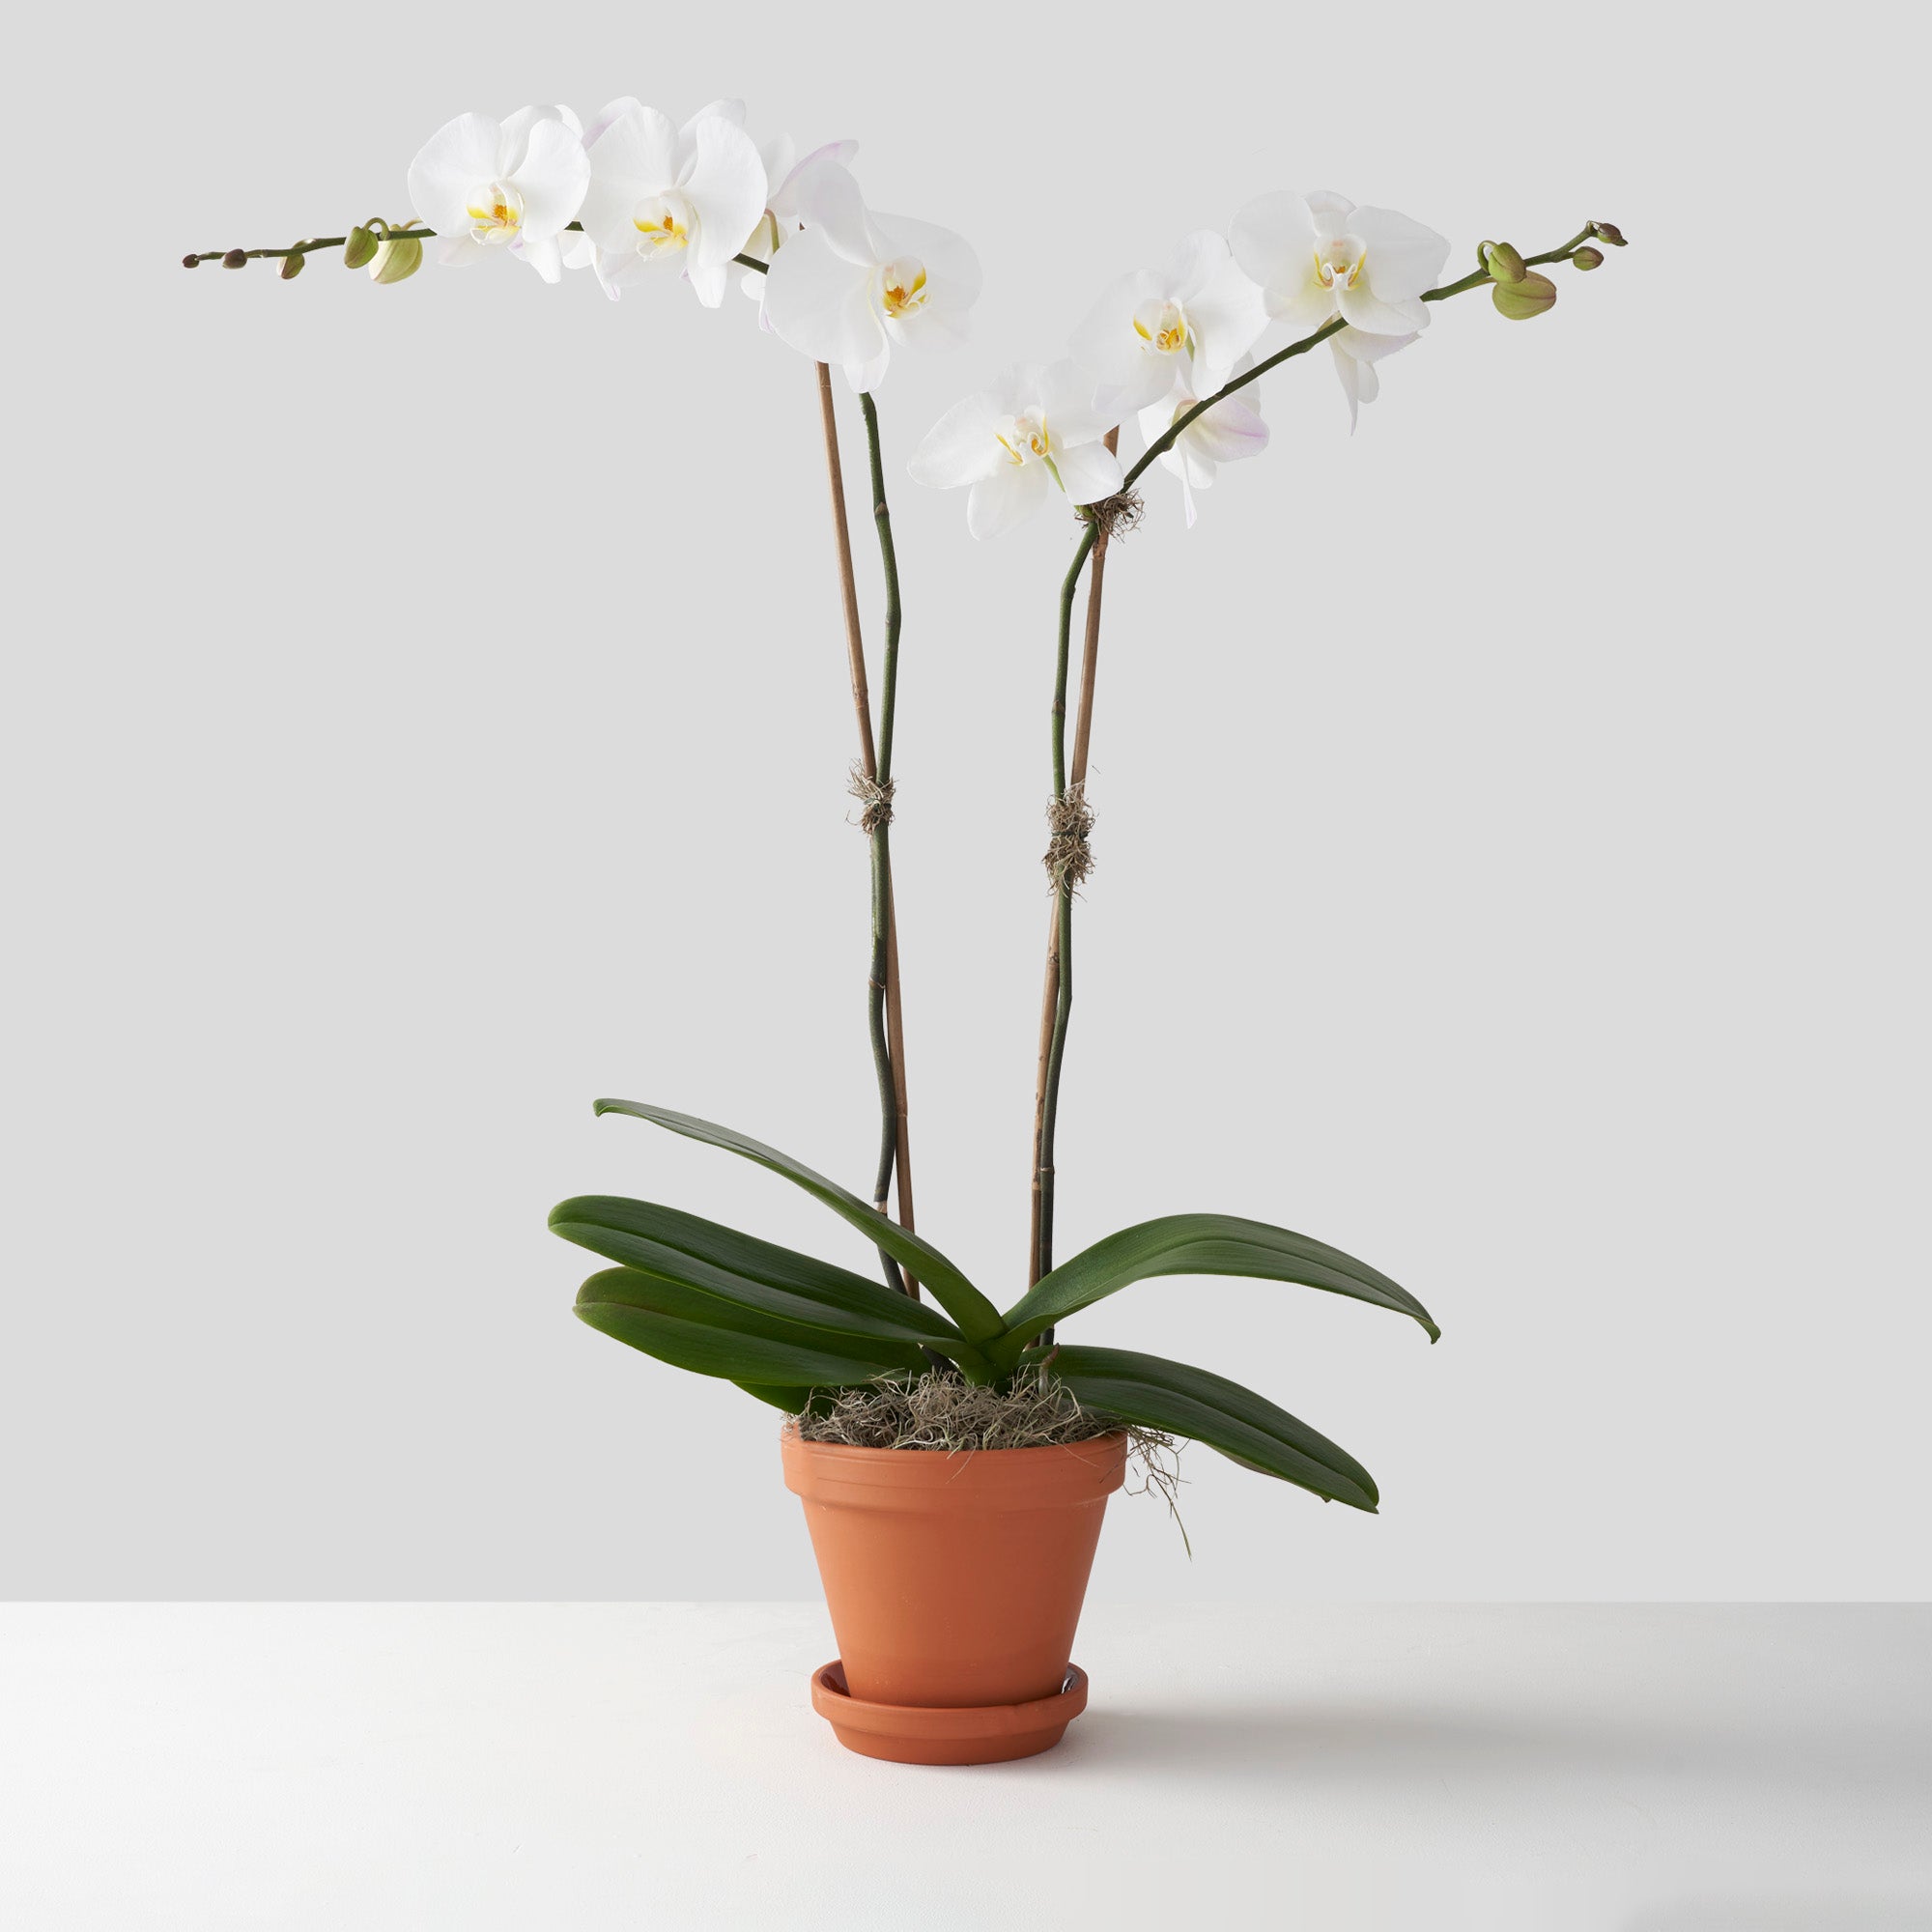 White phalaenopsis orchid plant with two flowering stems in clay pot on white background.